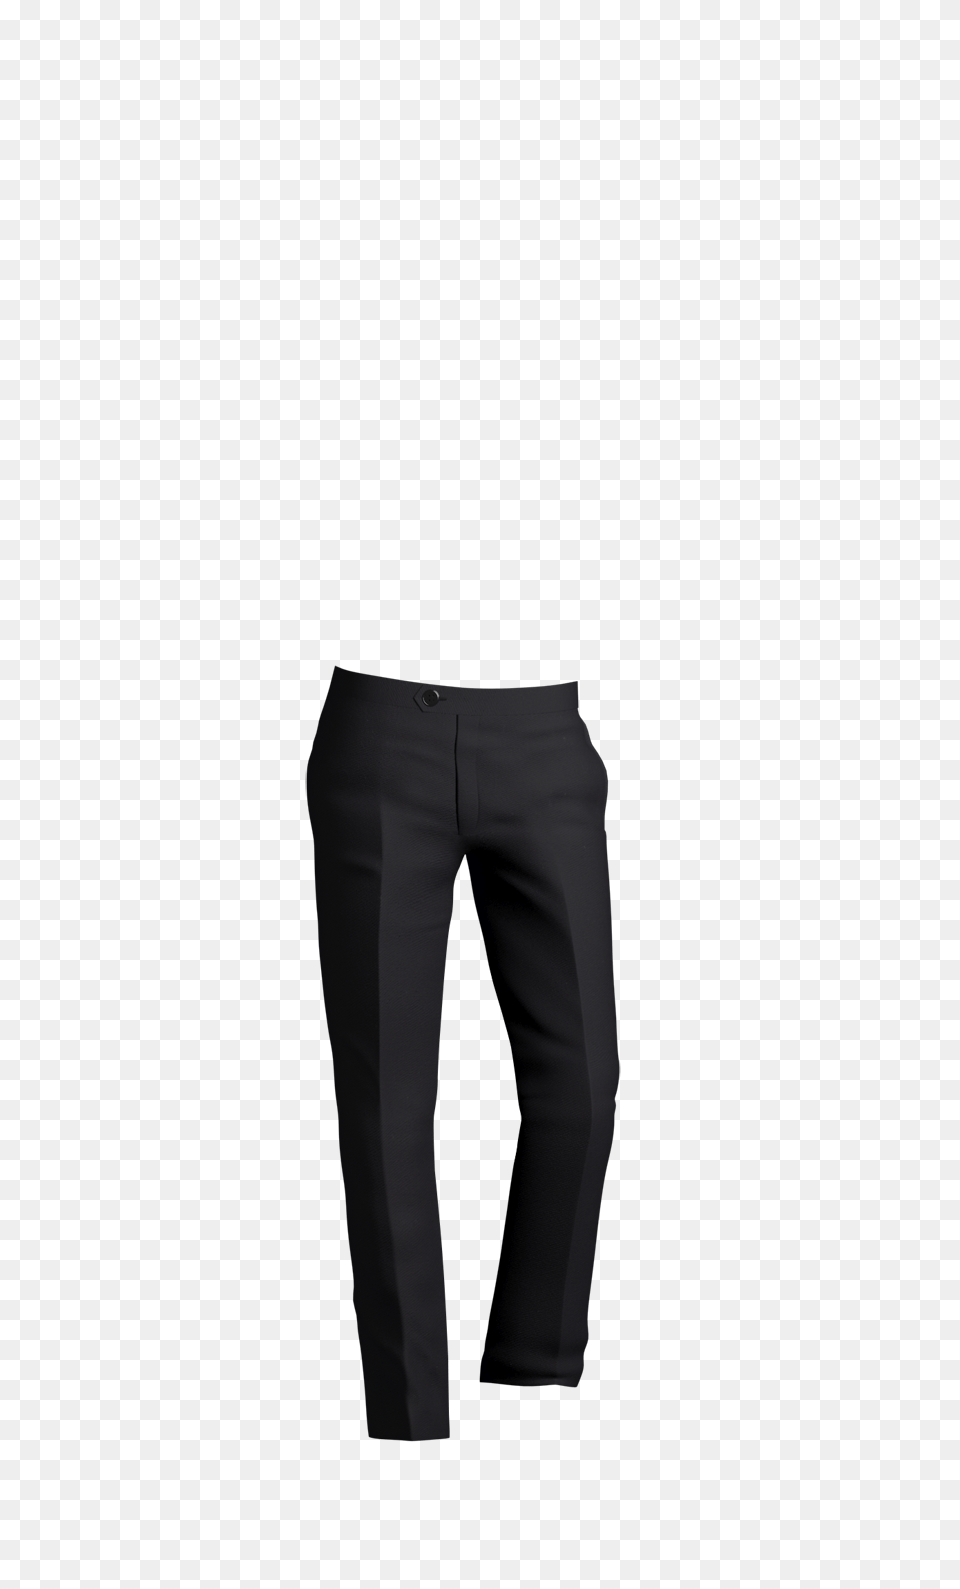 Design Your Own Tuxedo Suitopia, Clothing, Pants, Shorts Png Image